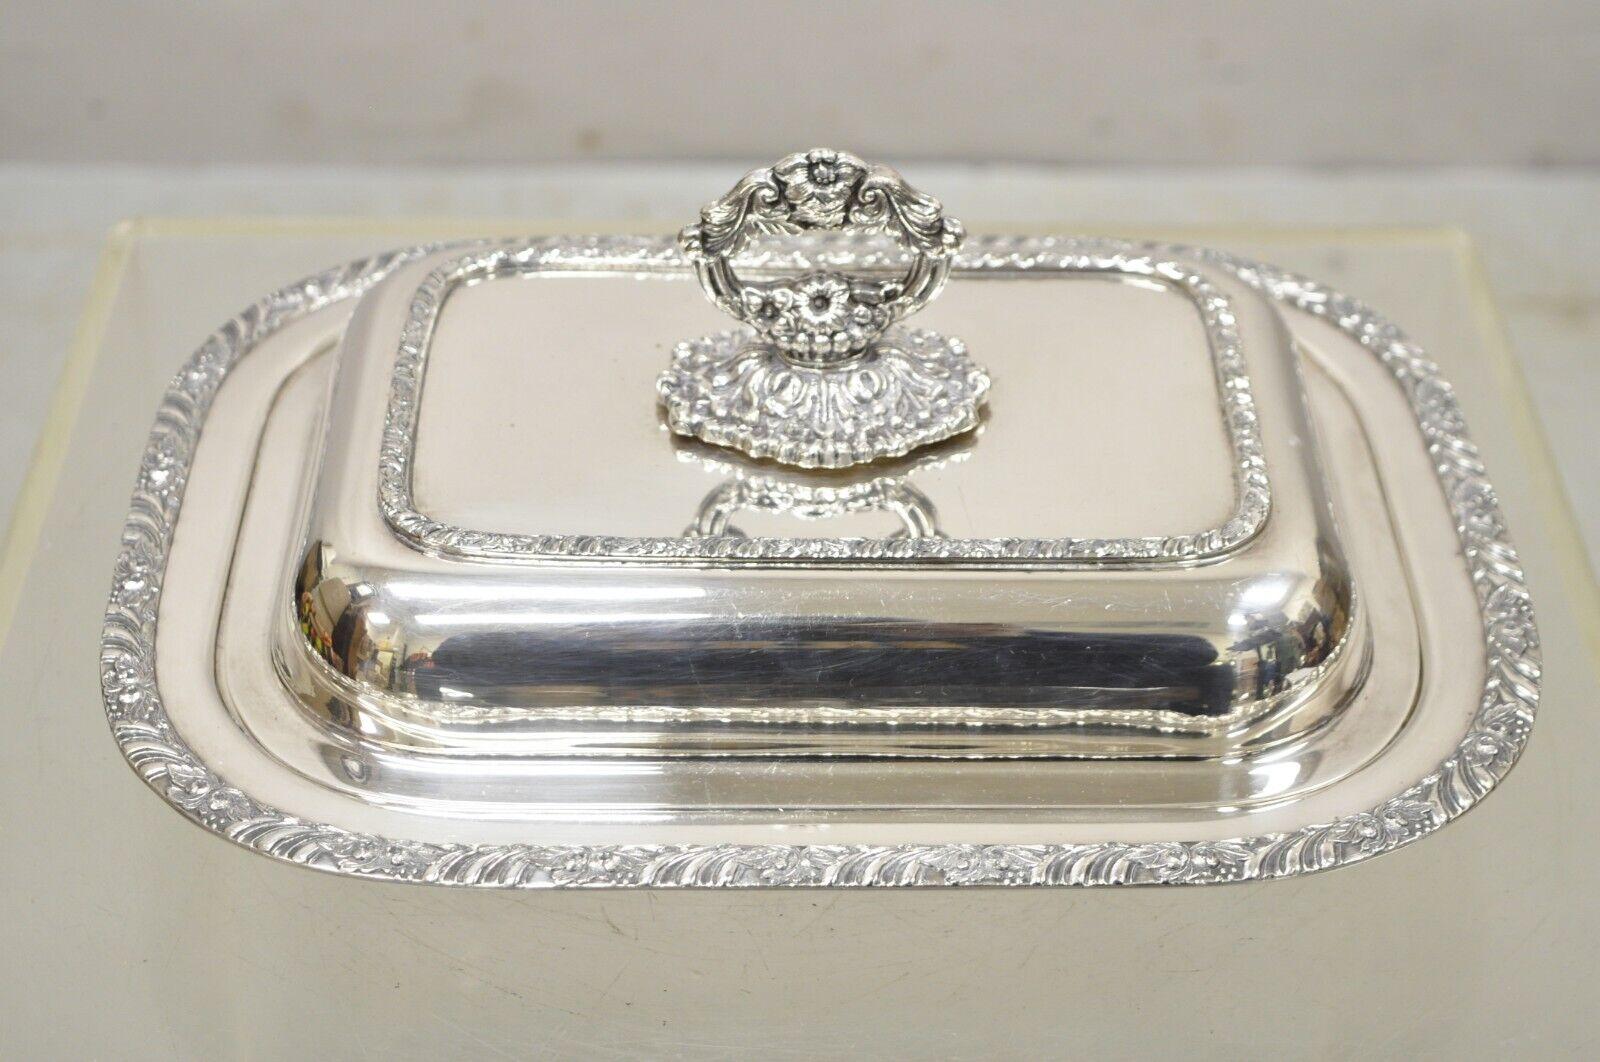 Oneida Henley community silver plated lidded Sserving dish platter. Item features Removable ornate handle, divided interior, very nice vintage item, great style and form. circa Mid-20th century Measurements: 5.5